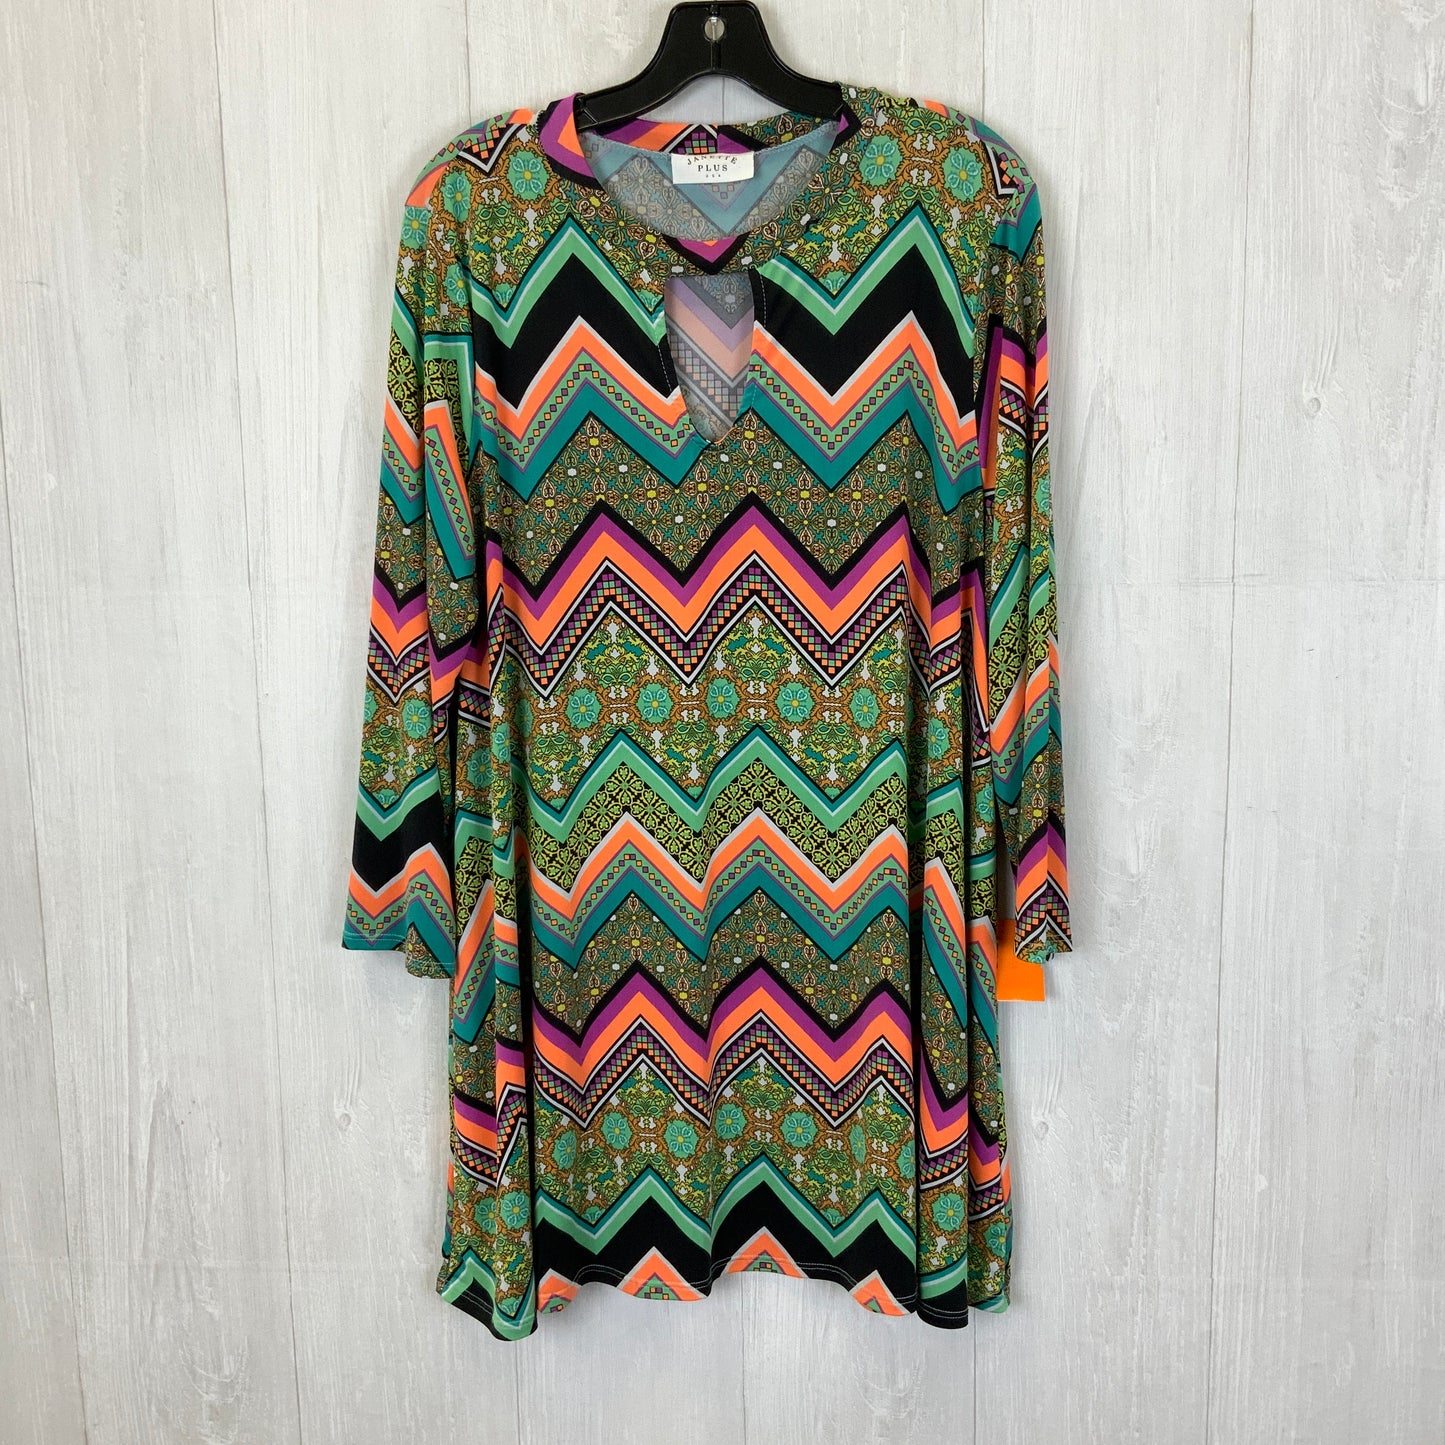 Multi-colored Top Long Sleeve Clothes Mentor, Size 2x